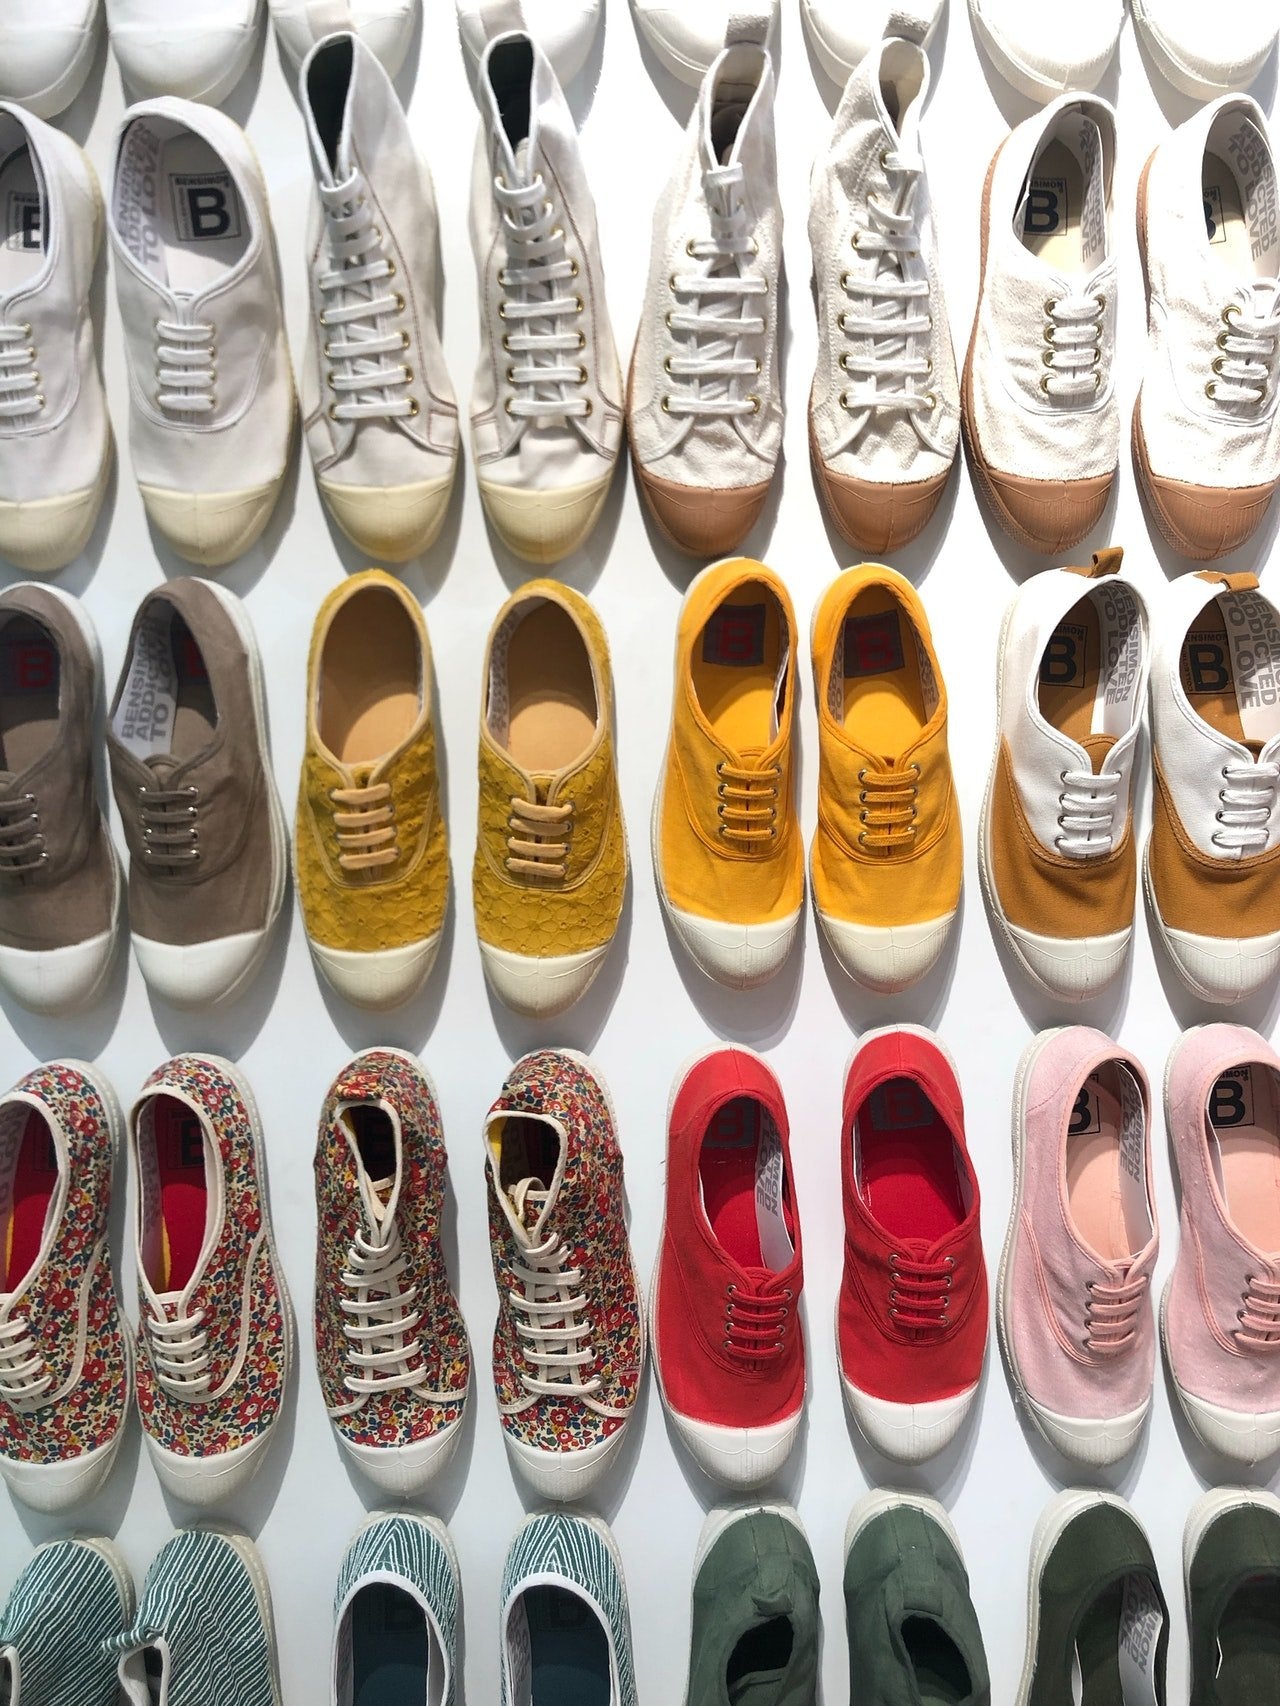 Addicted to Shoes? Us Too. 6 Reasons We Just Can't Stop